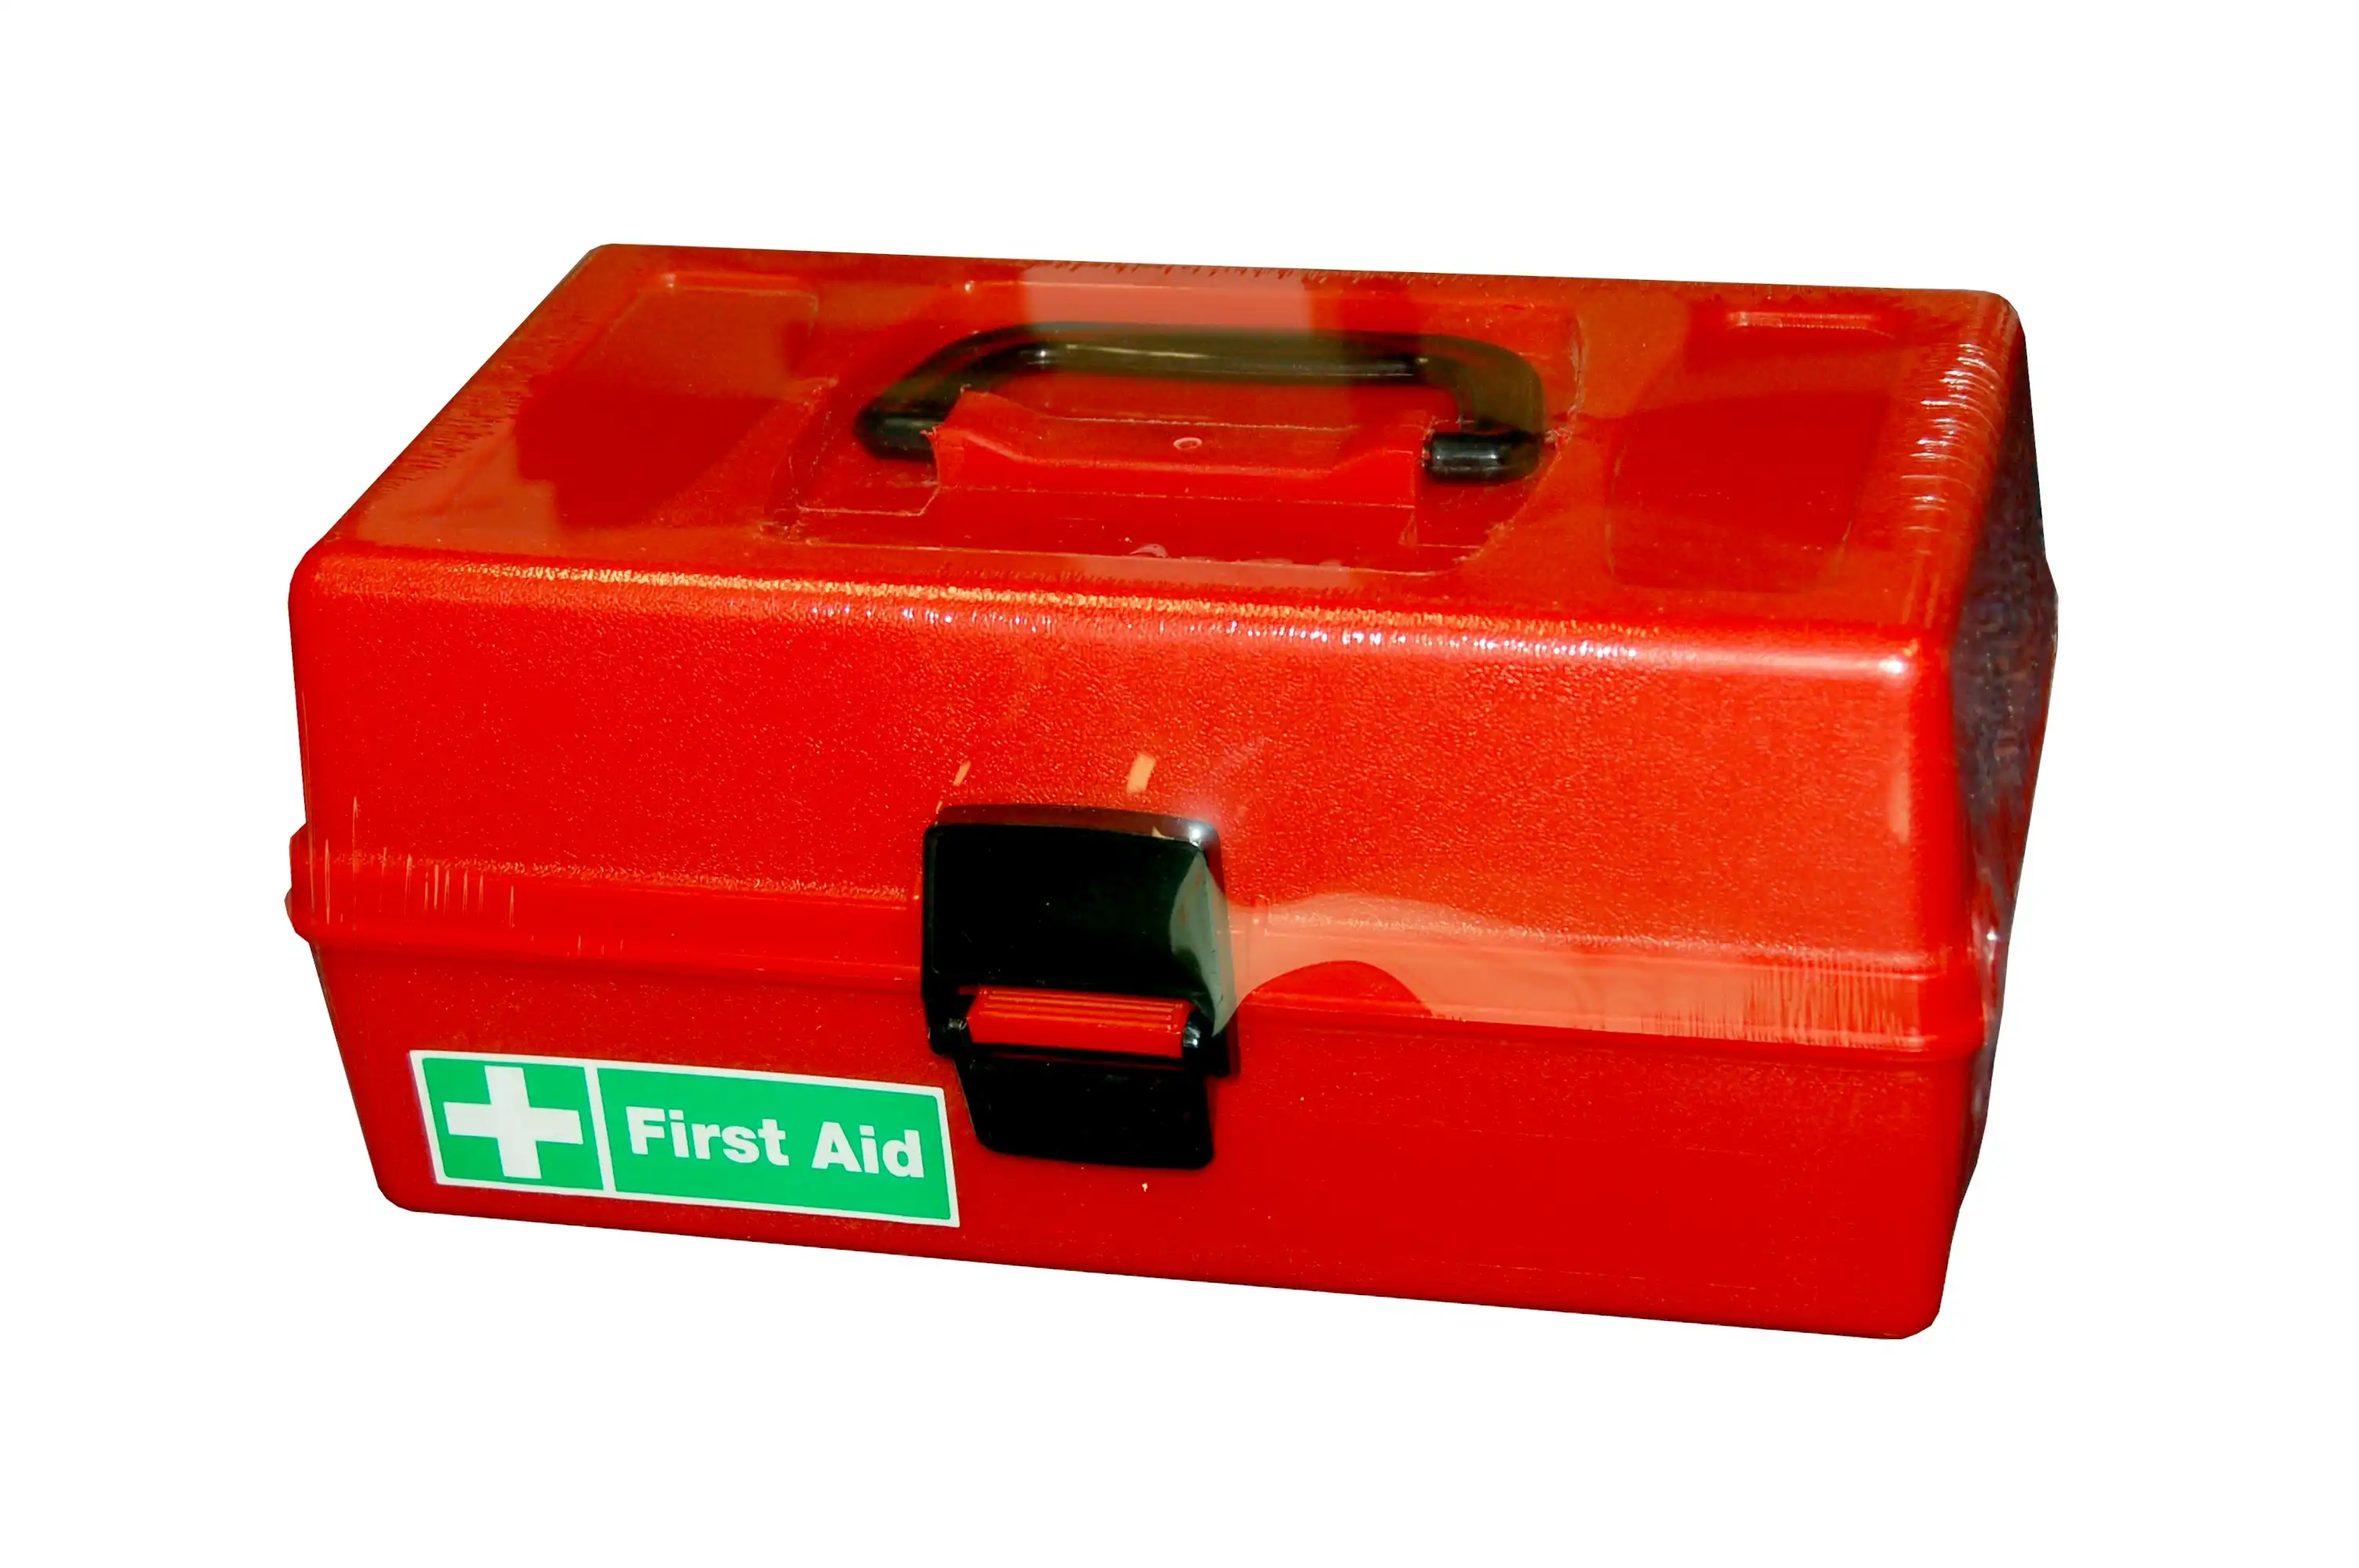 Livingstone First Aid Empty Polypropylene Case 30 x 18.5 x 14 cm Red Lid and Red Base with Compartments